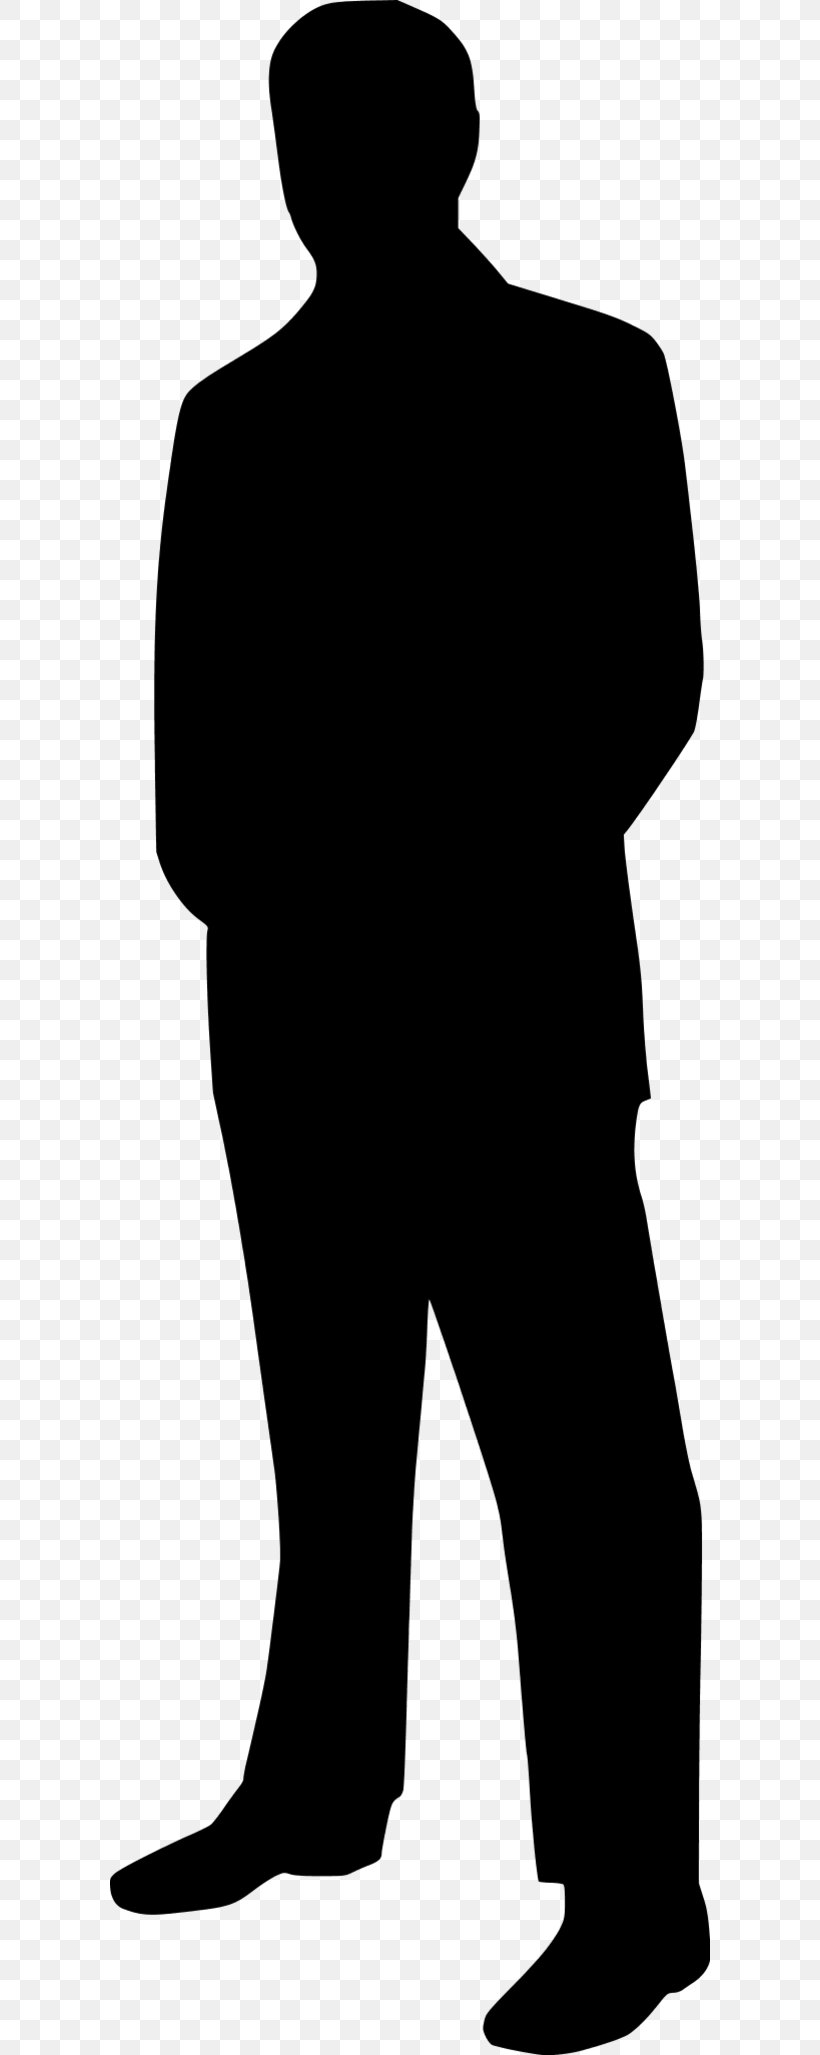 Silhouette Man Clip Art, PNG, 600x2055px, Silhouette, Black, Black And ...